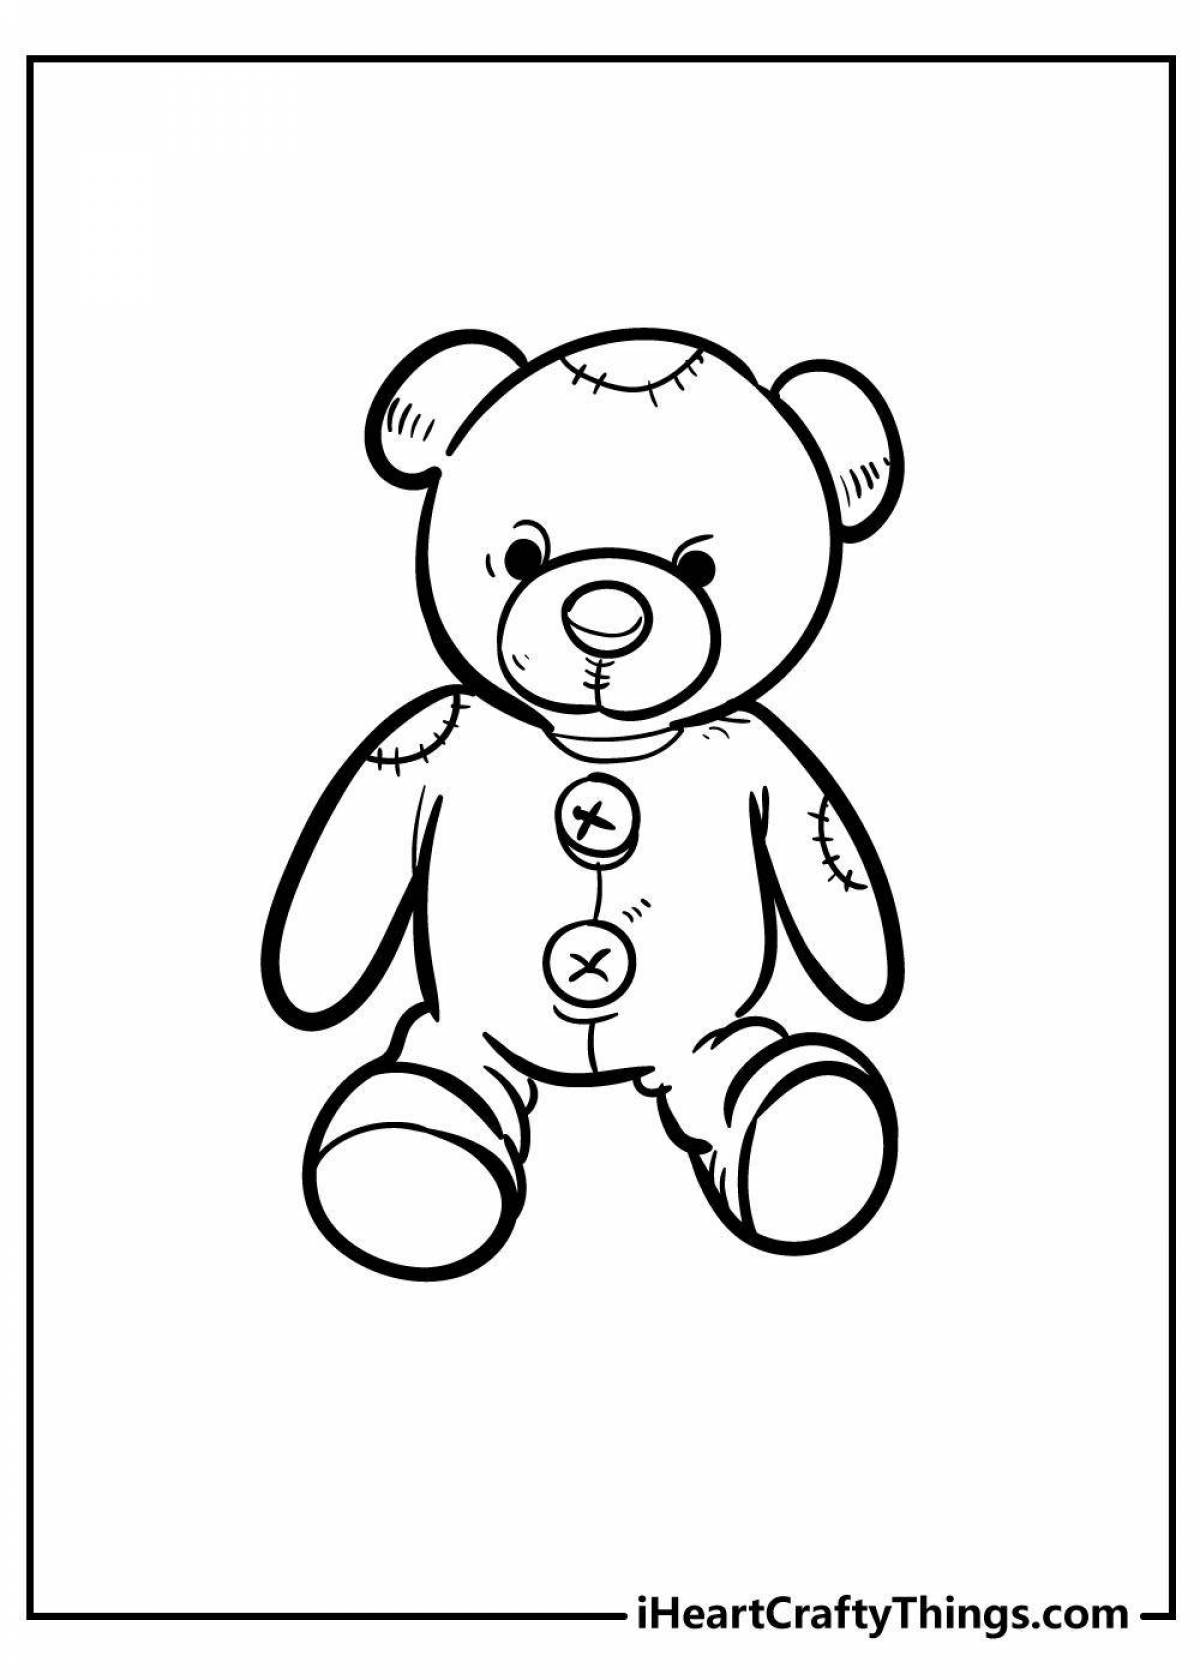 Fun teddy bear coloring book for 5-6 year olds